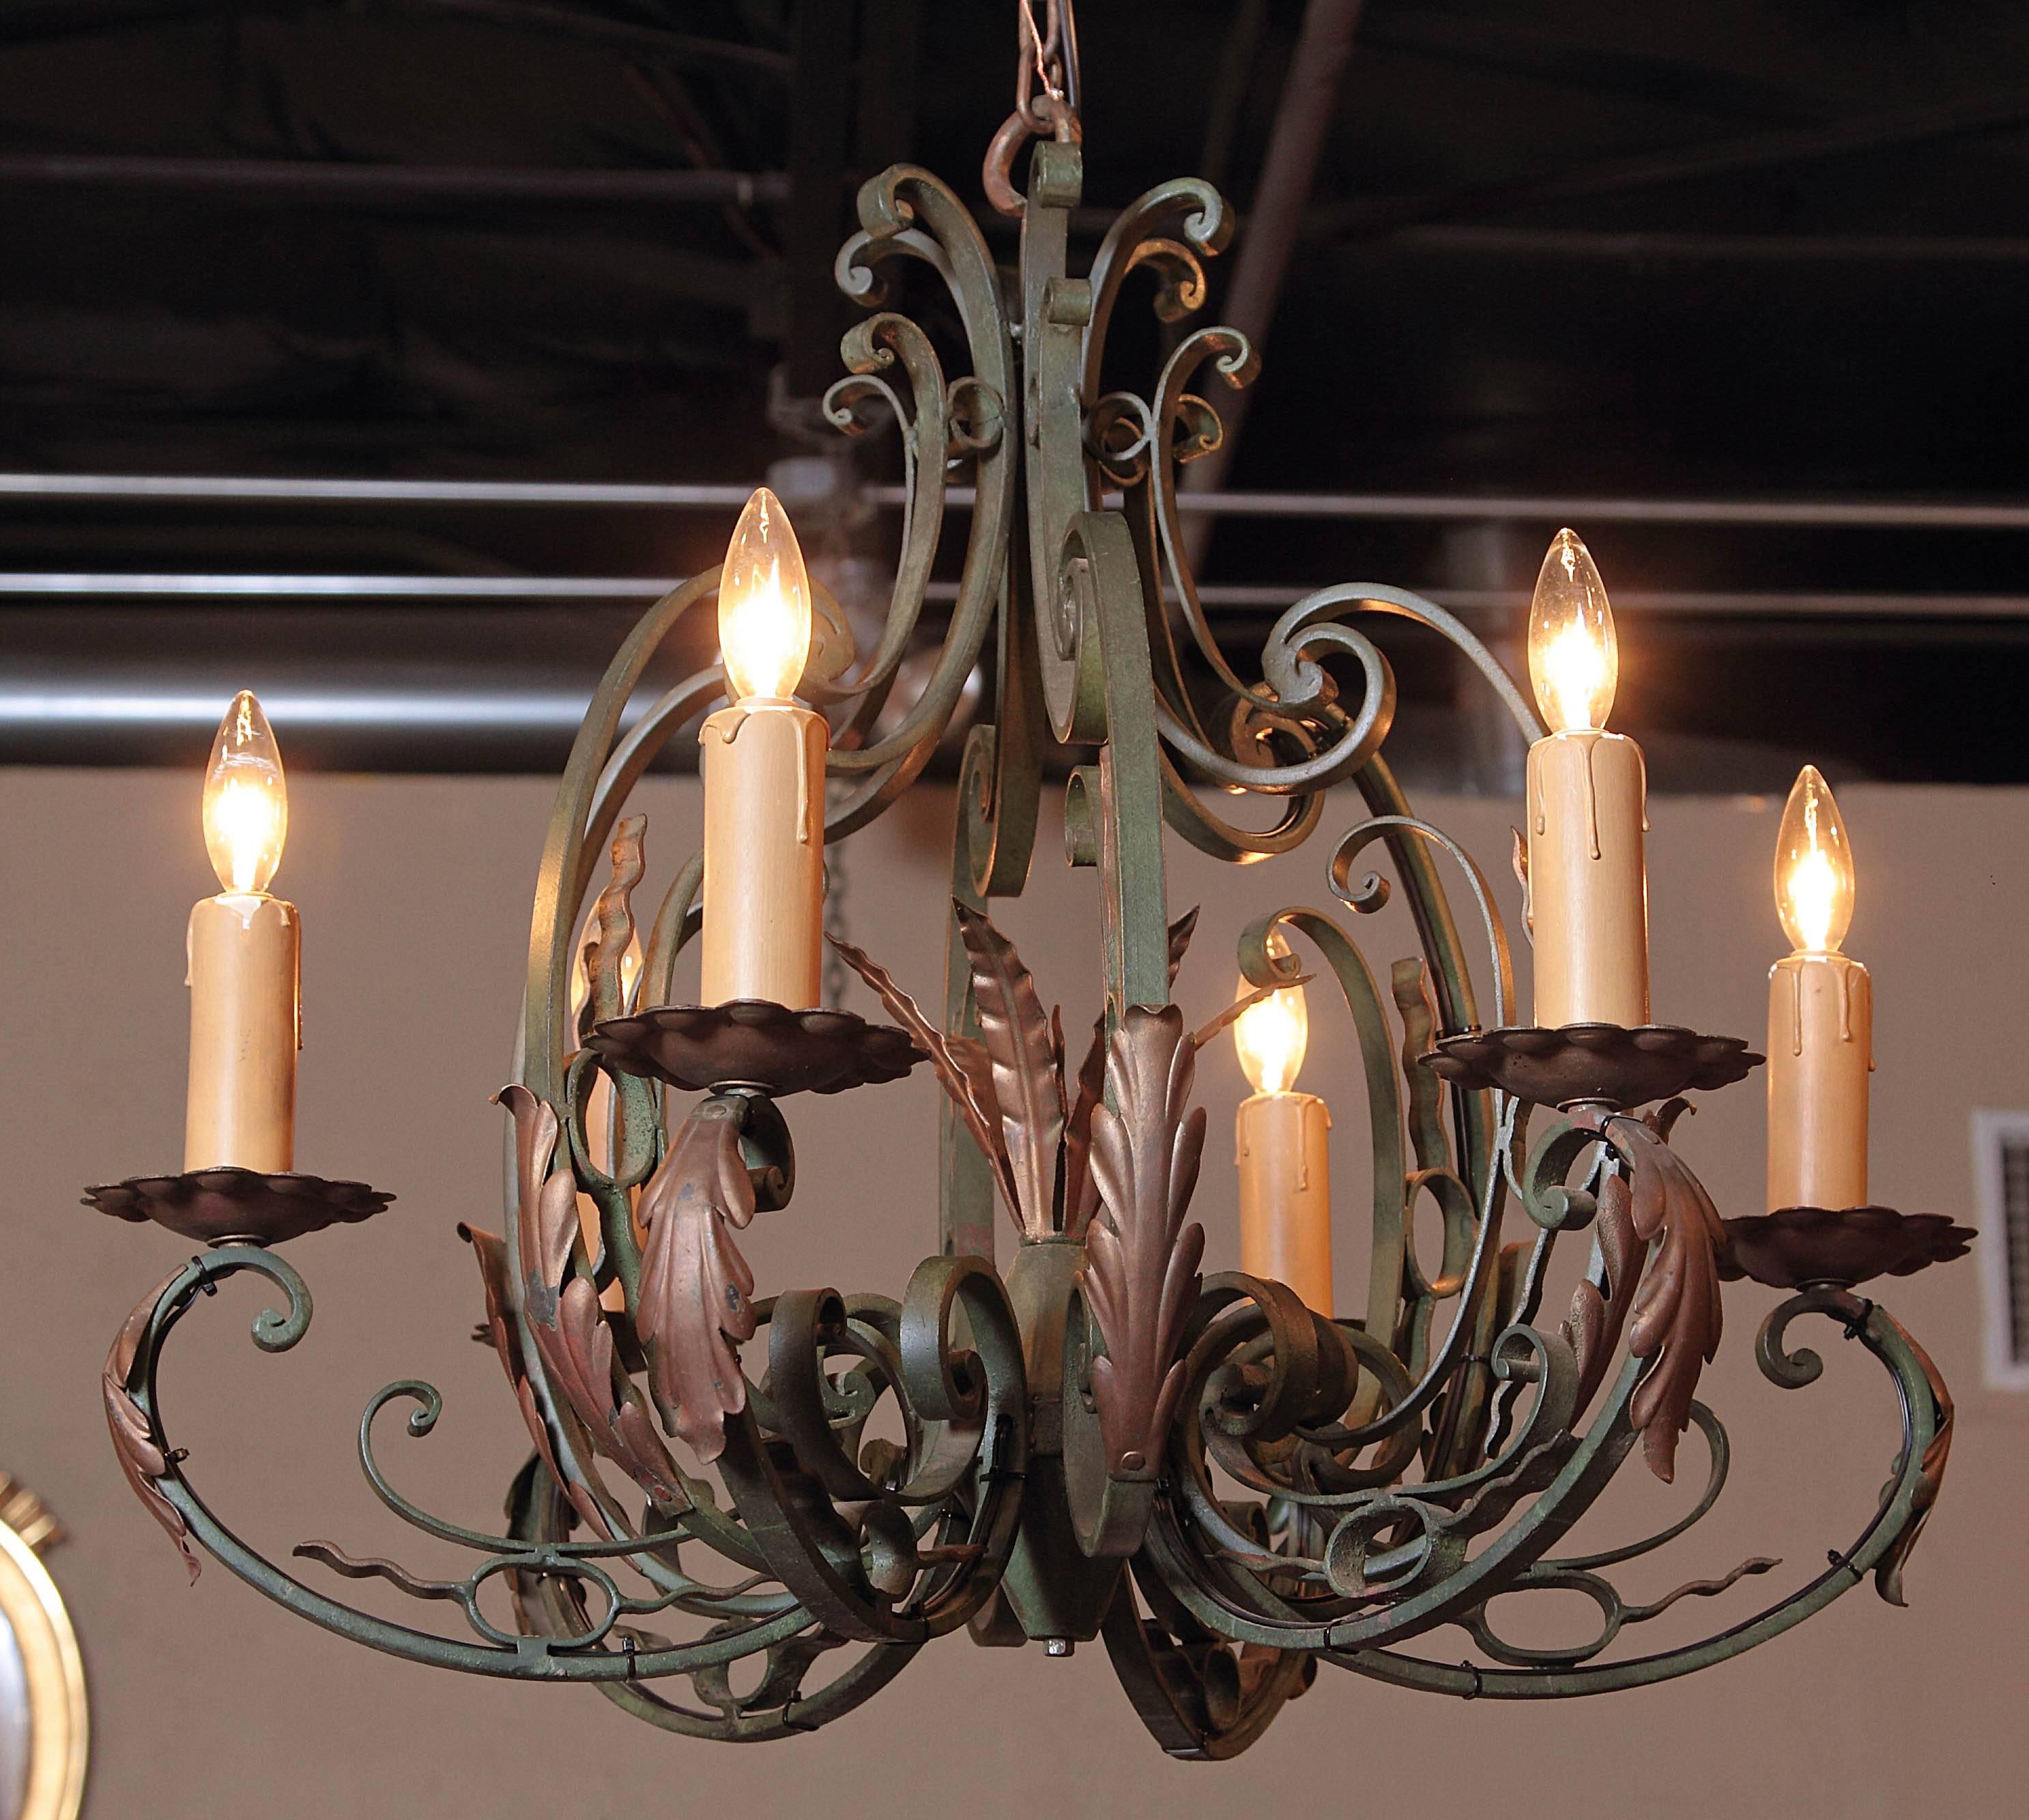 This turn of the century iron chandelier would make a beautiful decorative addition to a bedroom, breakfast room or living room. Crafted in France, circa 1920, the rustic light fixture has a scrolling base and six scrolled arms with their original